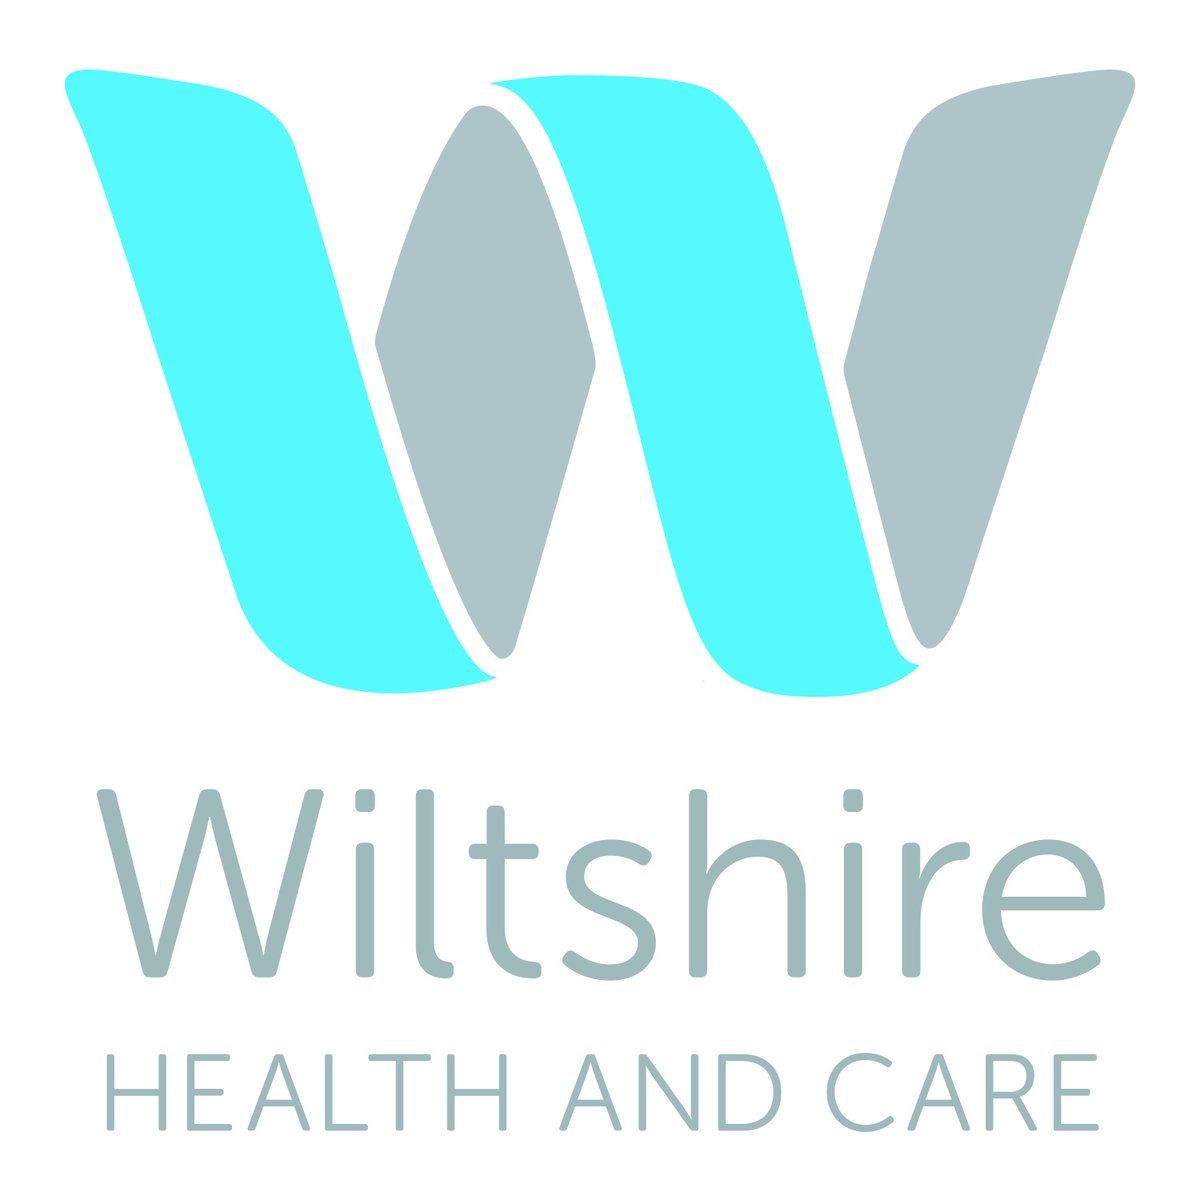 Strike action tomorrow by some staff who are Unison members is likely to impact on some of our services. We're contacting patients directly if appointments are affected. If you are not contacted, please attend your appointment. Latest news on our website: wiltshirehealthandcare.nhs.uk